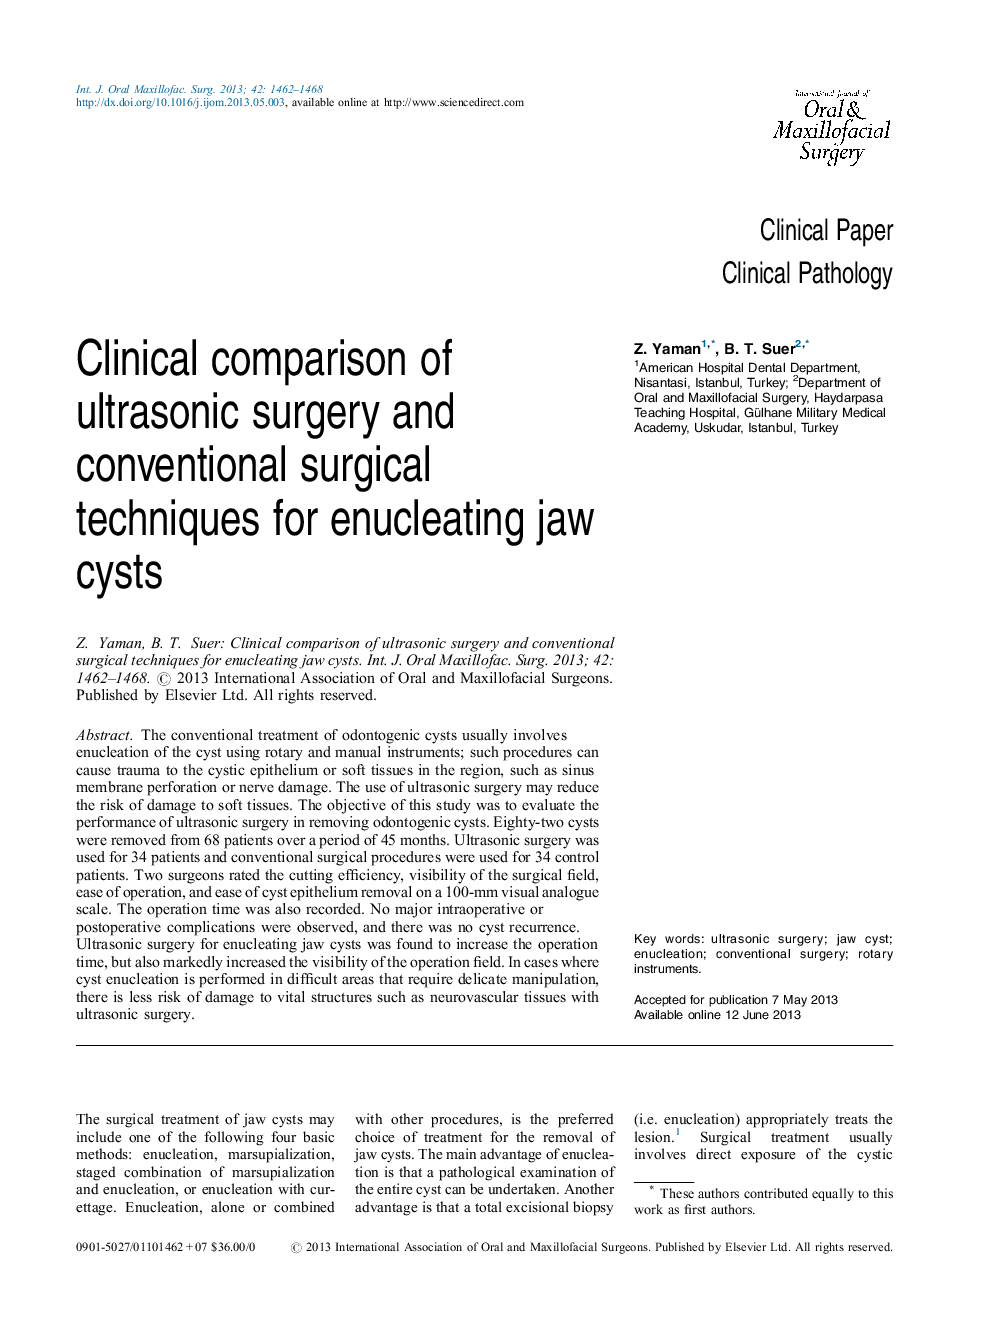 Clinical comparison of ultrasonic surgery and conventional surgical techniques for enucleating jaw cysts